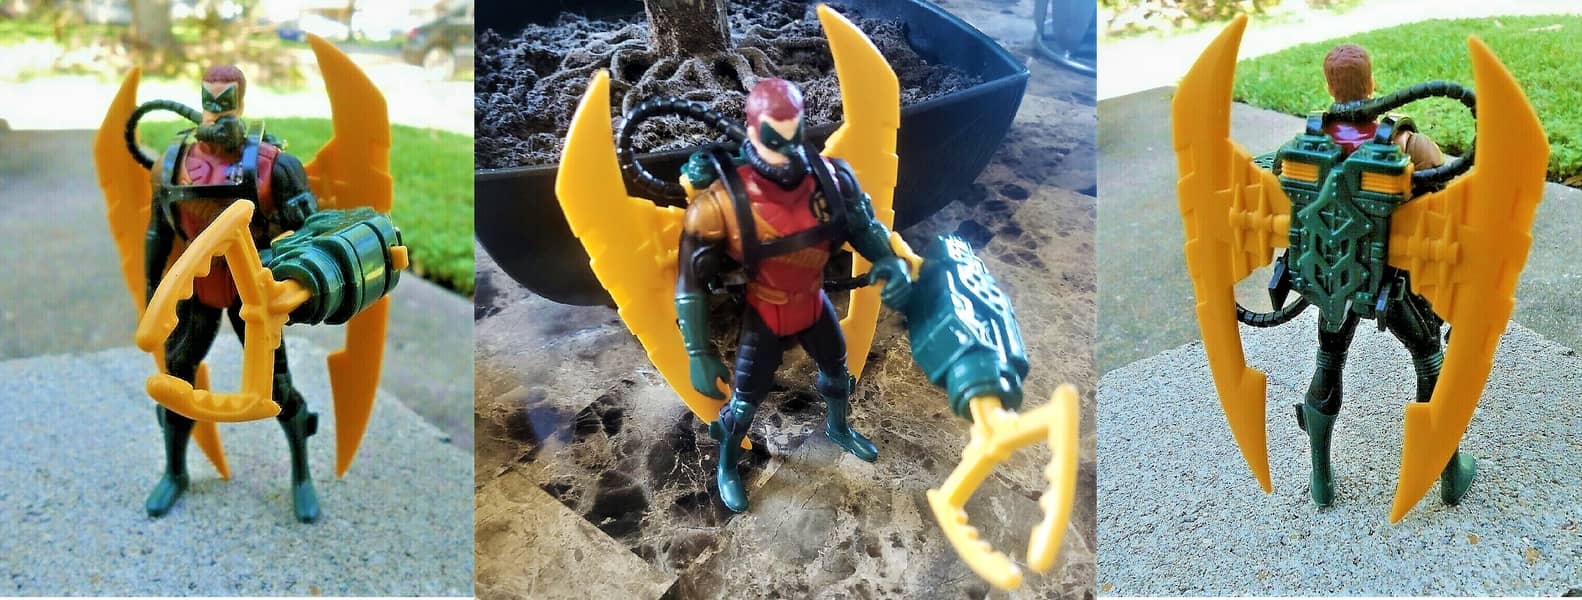 1995 BATMAN FOREVER - Hydro Claw Robin Vintage Action Figure by KENNER 5